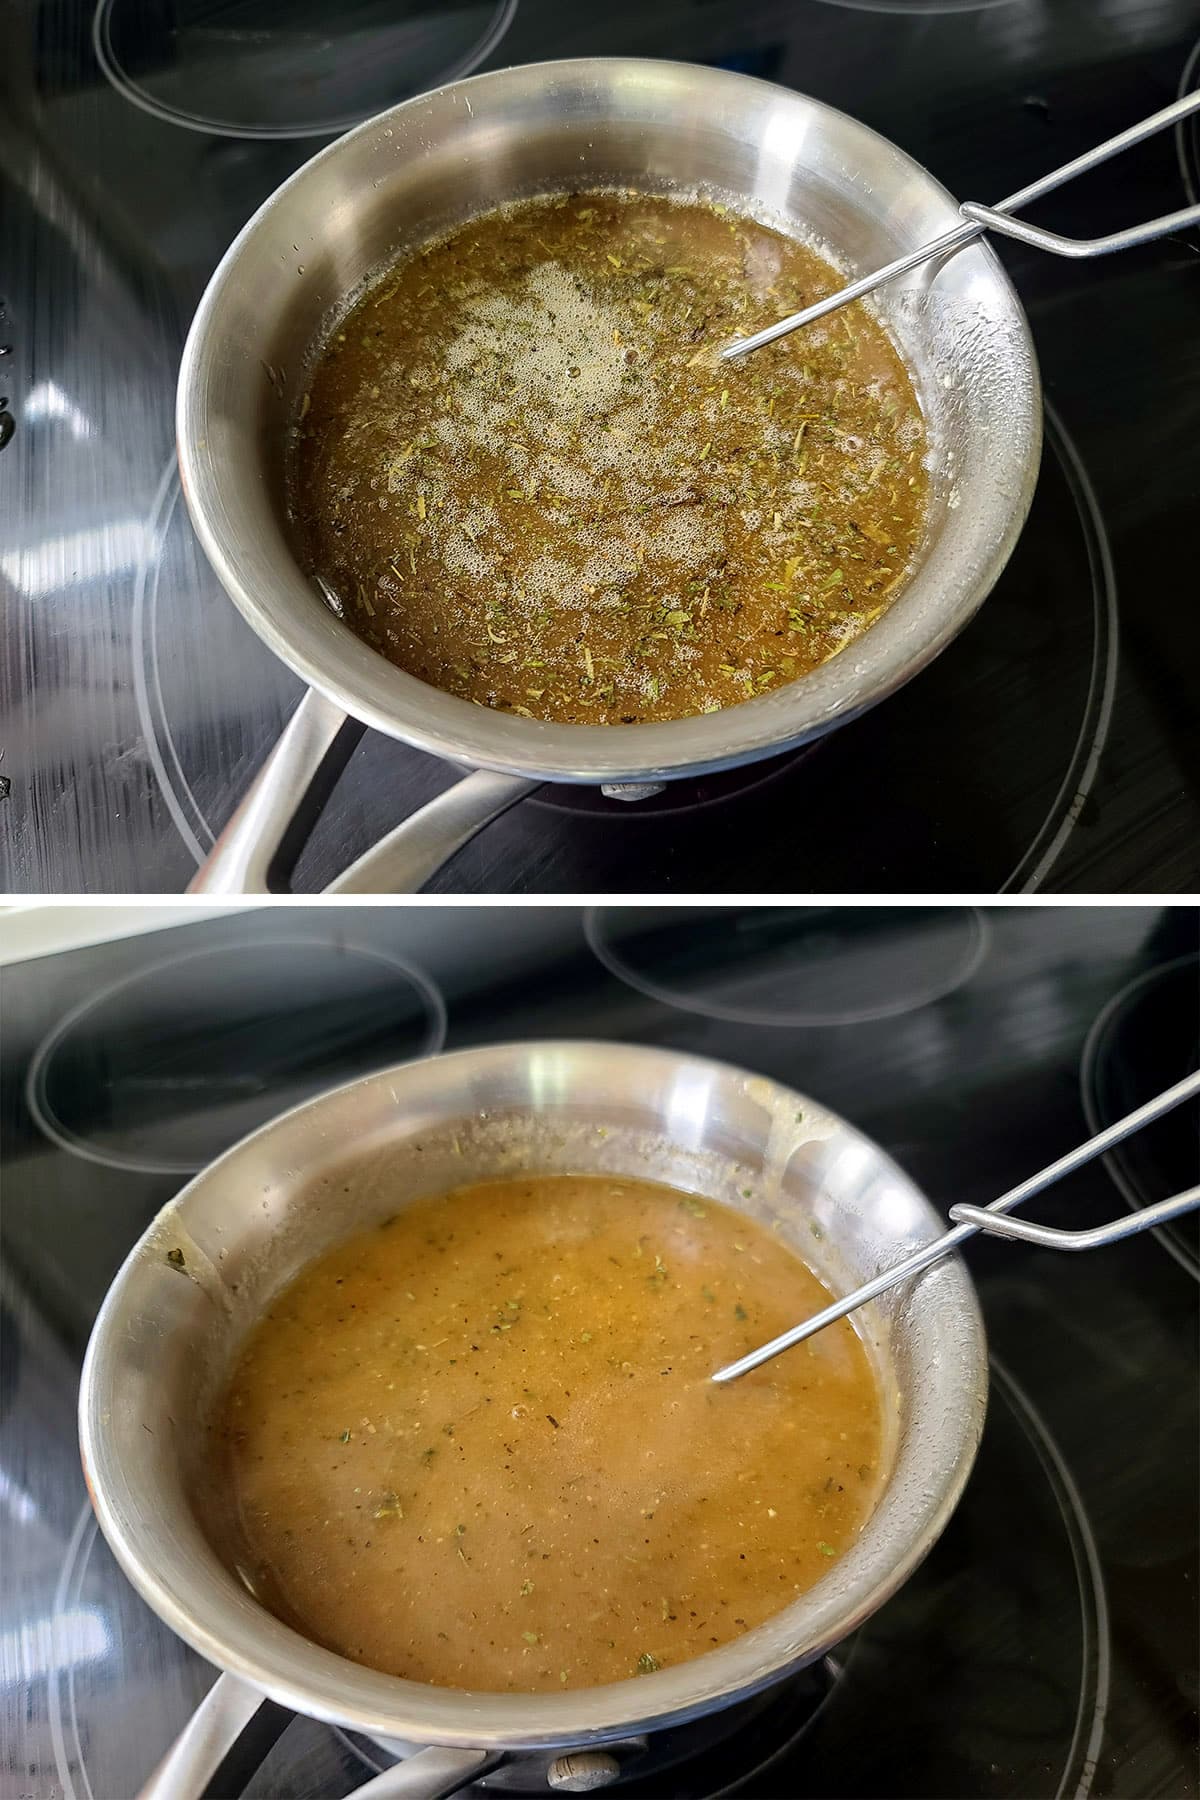 A 2 part image showing the seasonings being whisked into the gravy and simmered.